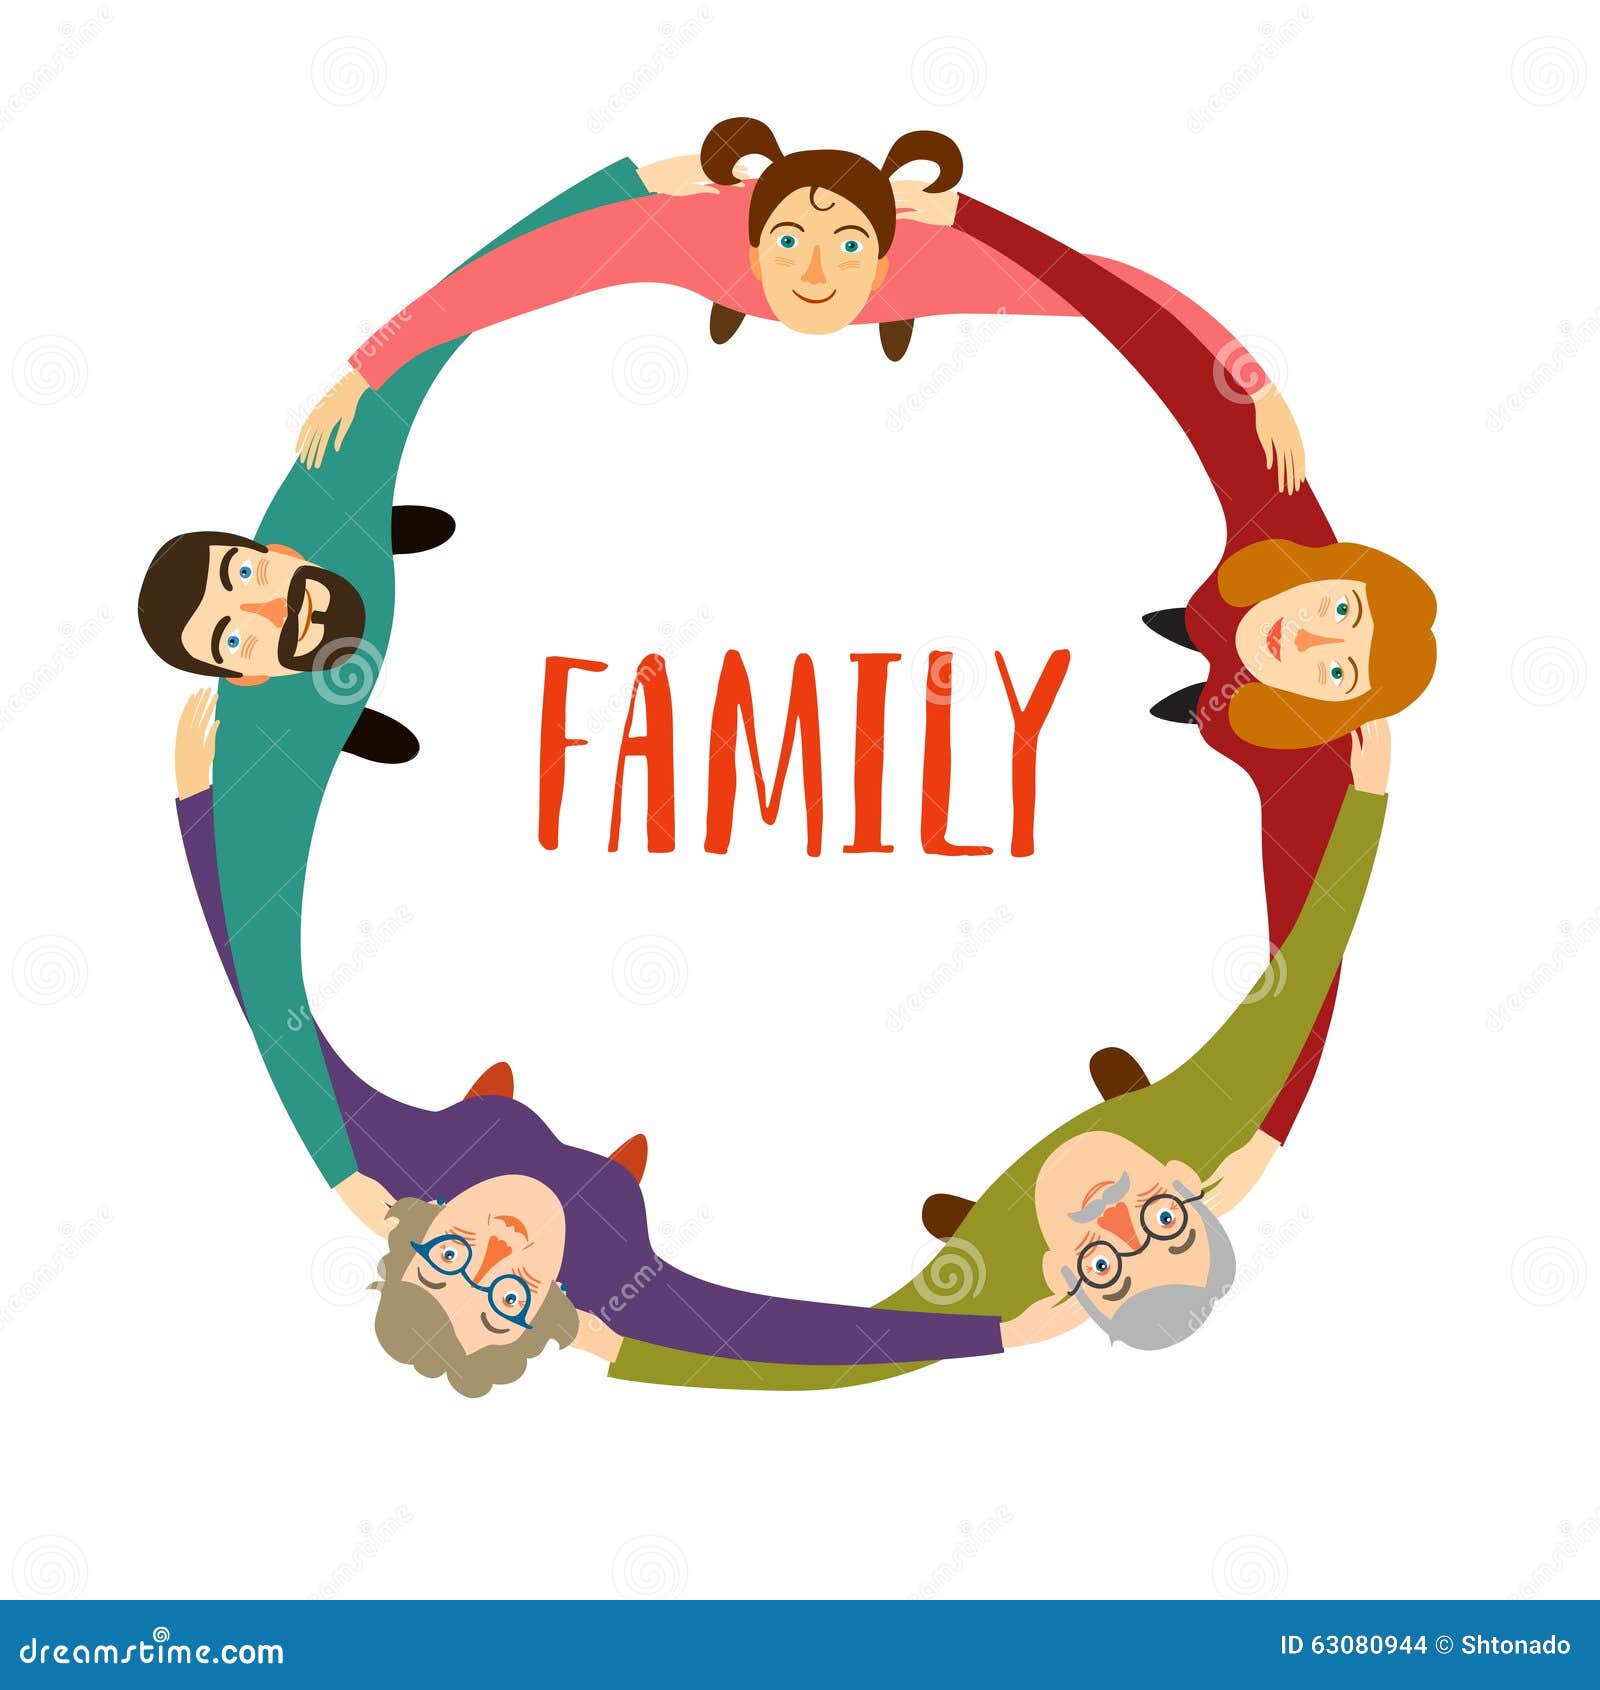 family hugging clipart - photo #25